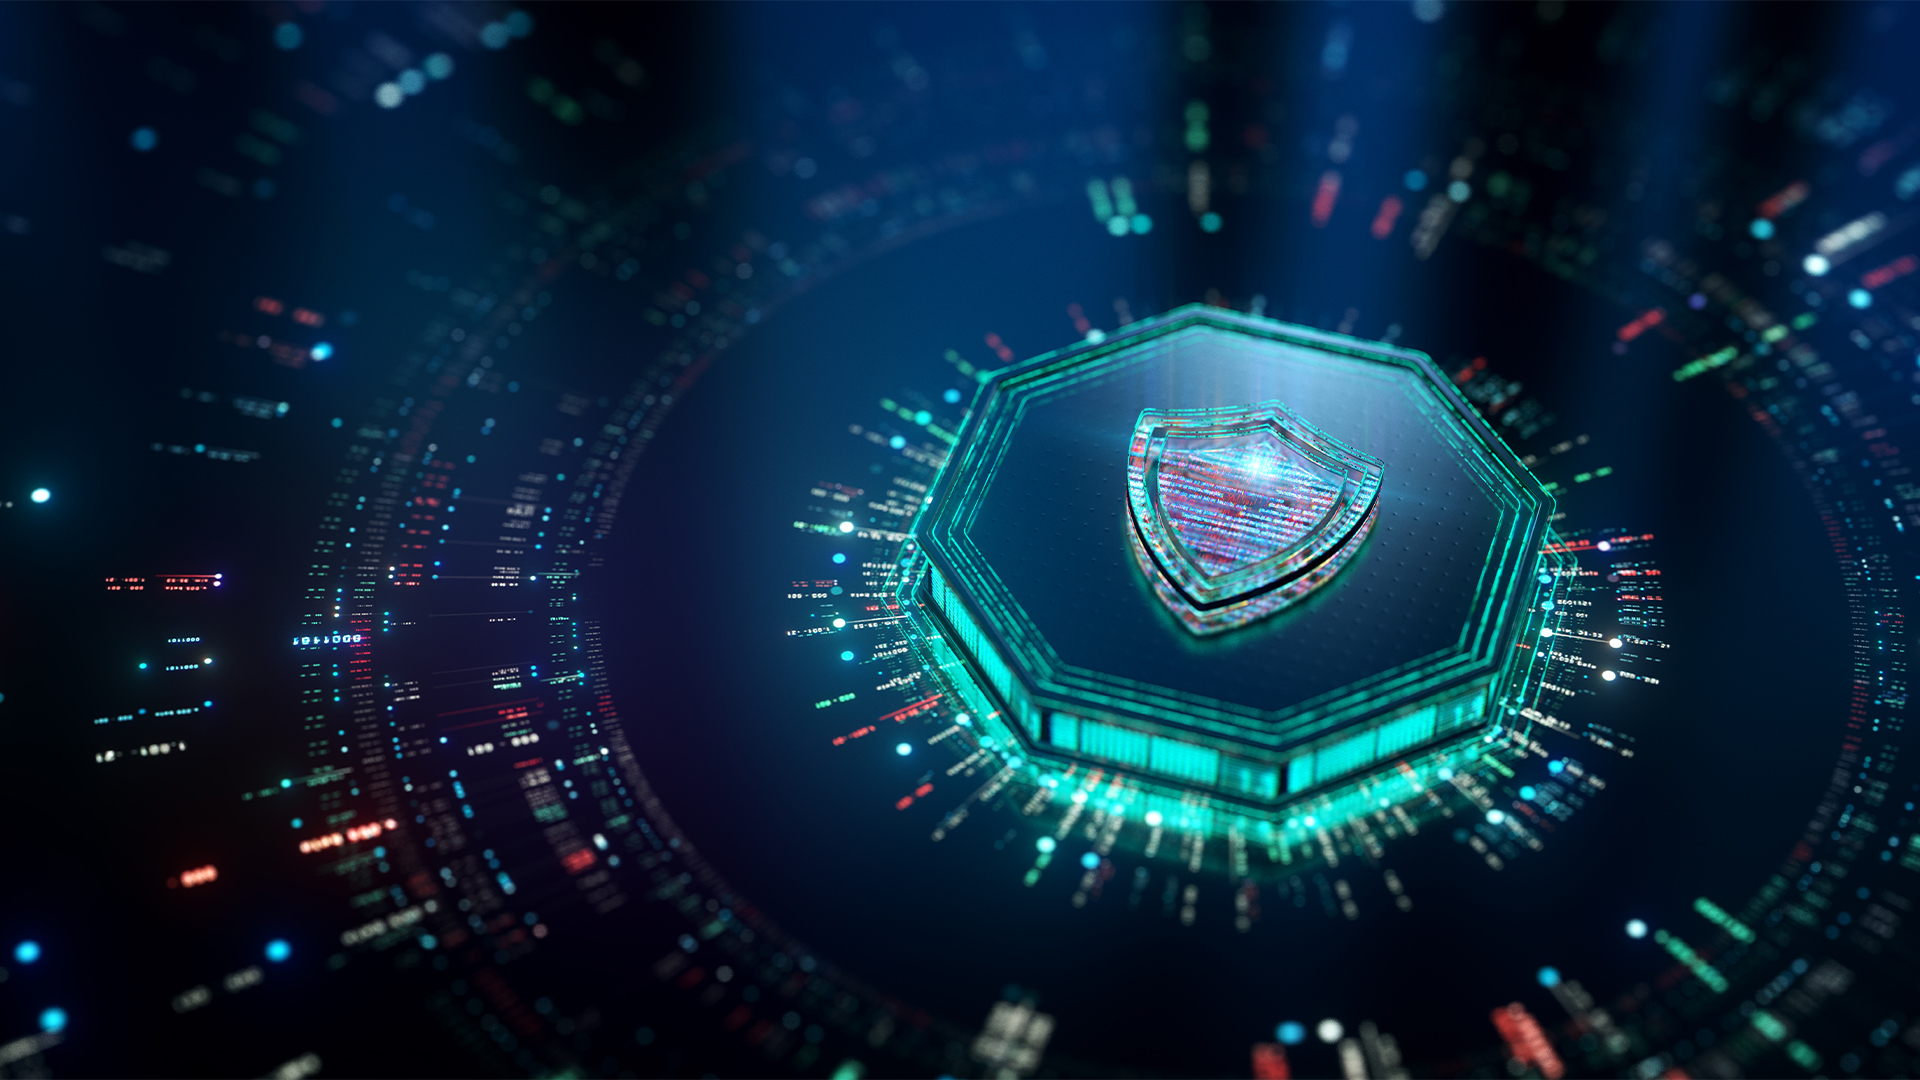 Cyber shield on circuit abstract background